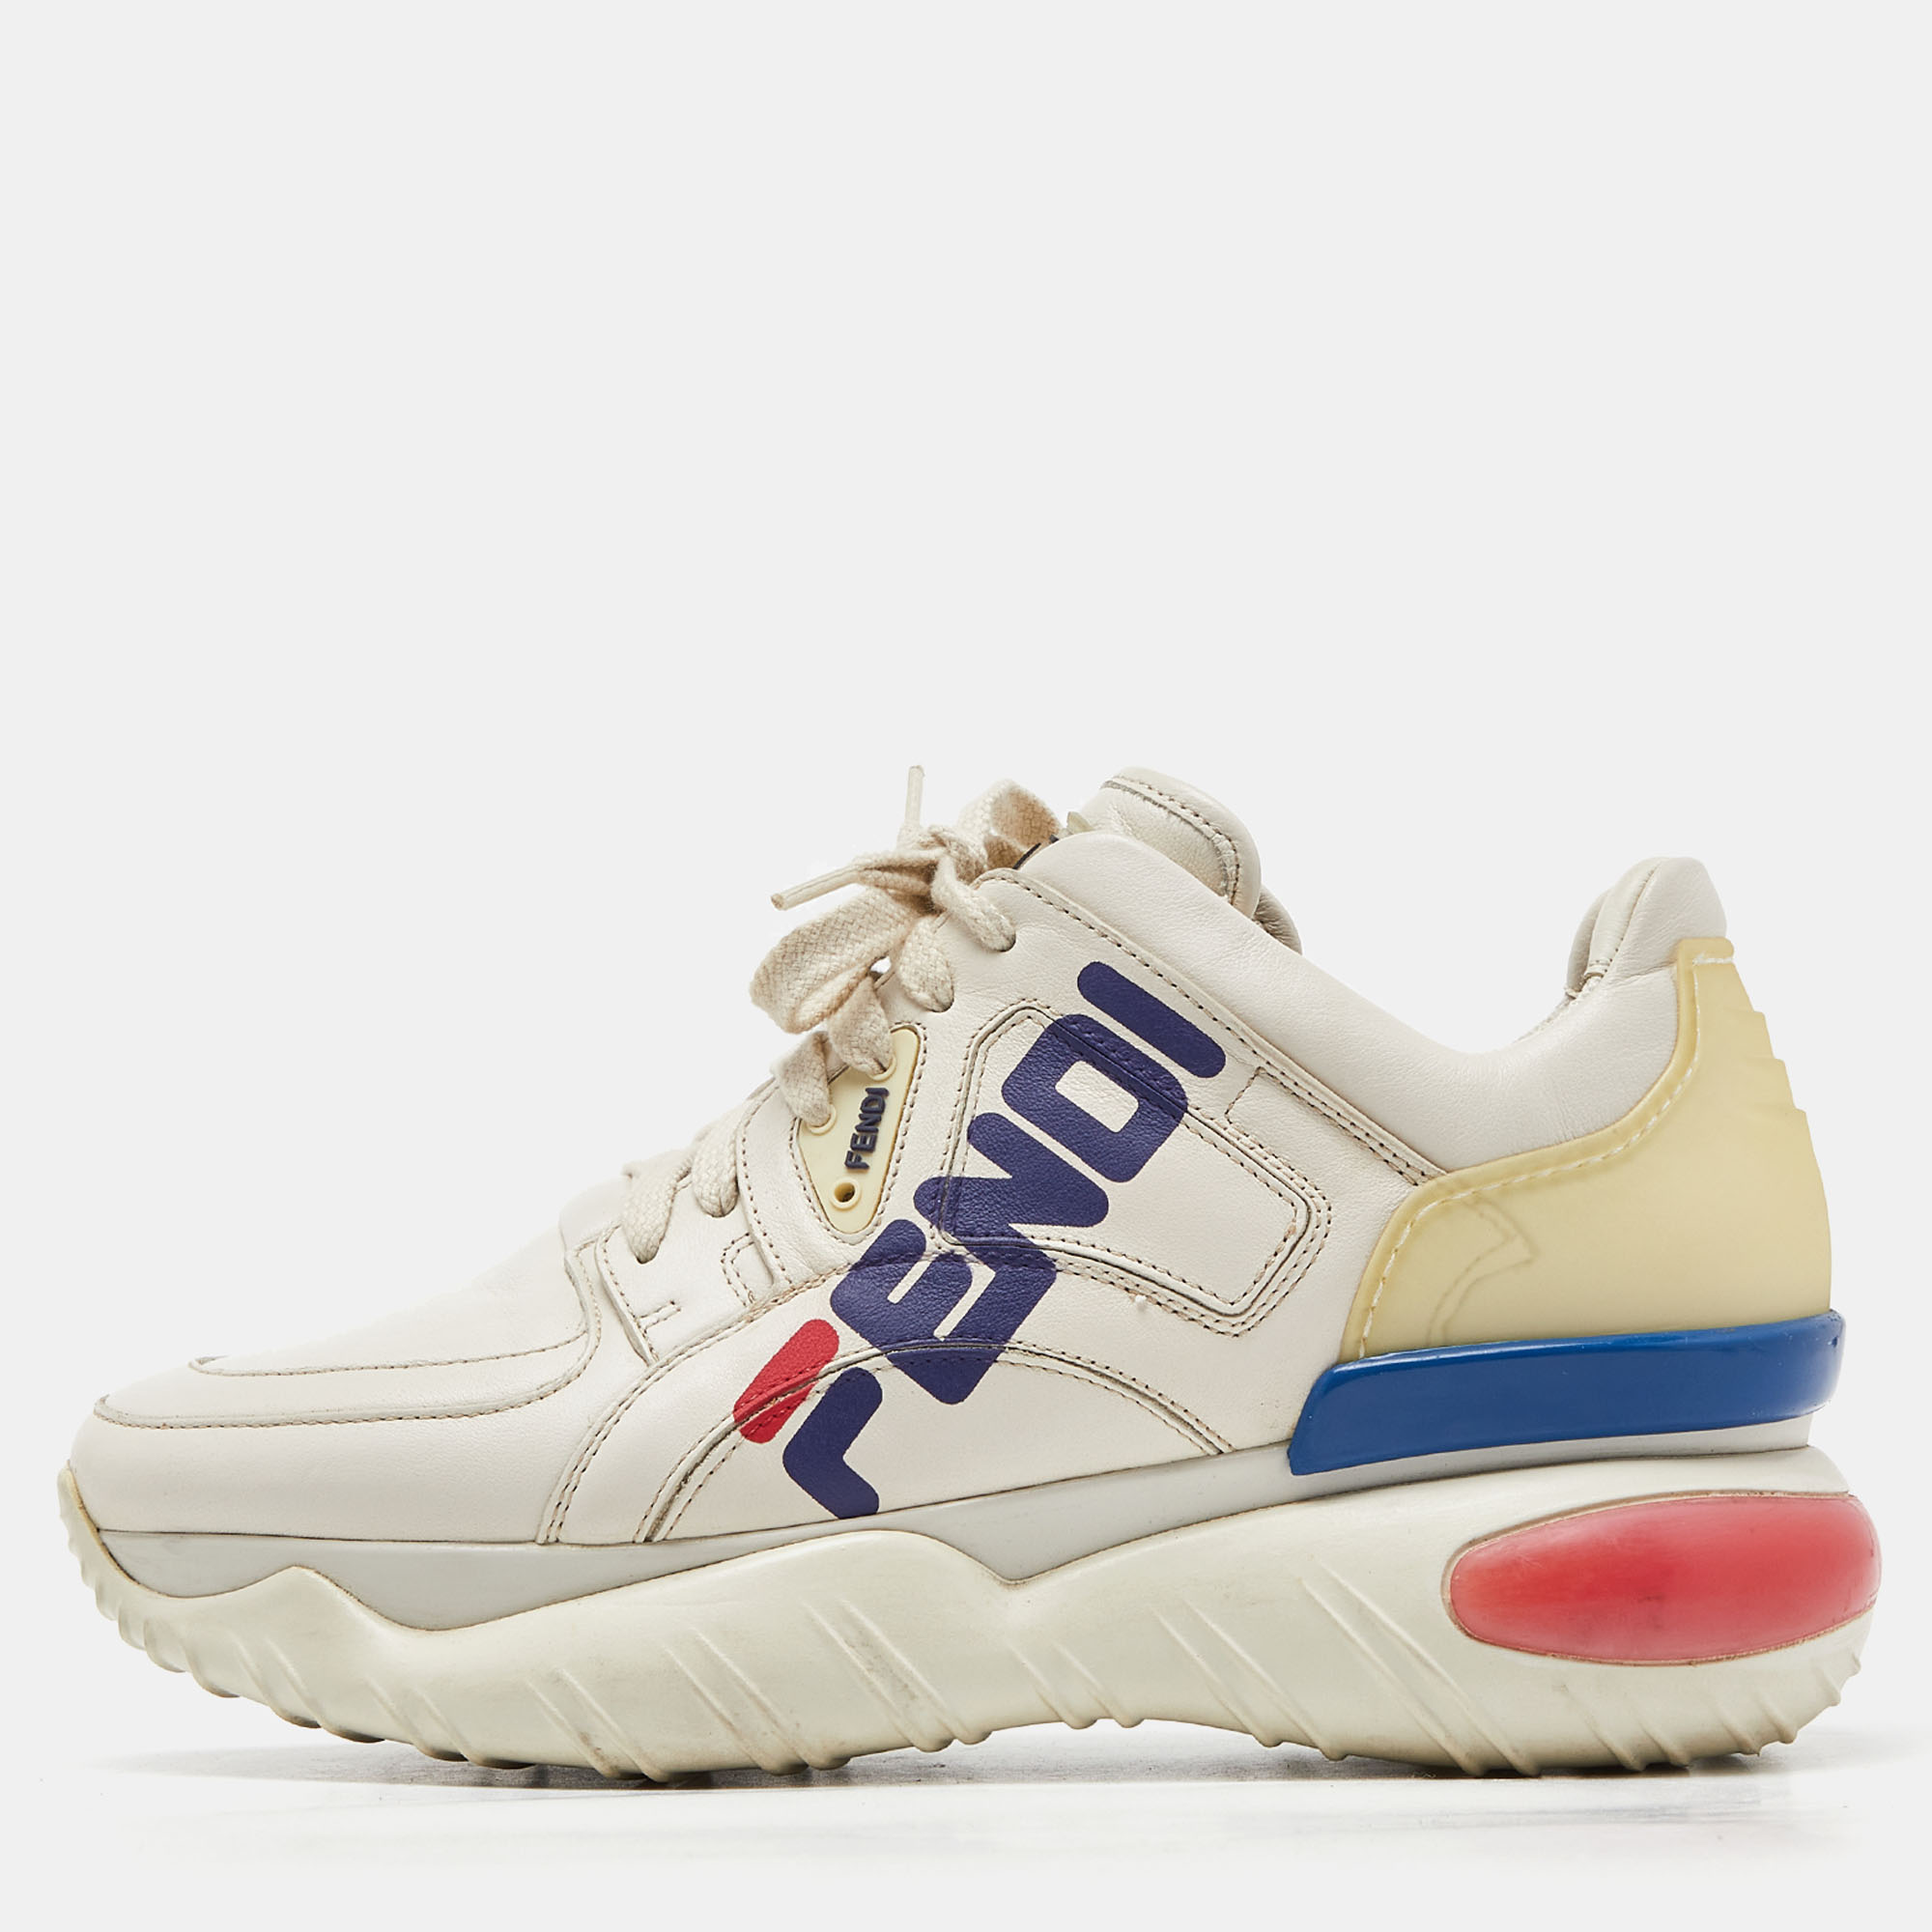 These sneakers are from the collaboration between Fendi and Fila. Made from leather and rubber they feature durable soles and lace up vamps. Filas signature red and blue as well as other elements are seamlessly incorporated into the Fendi pair.